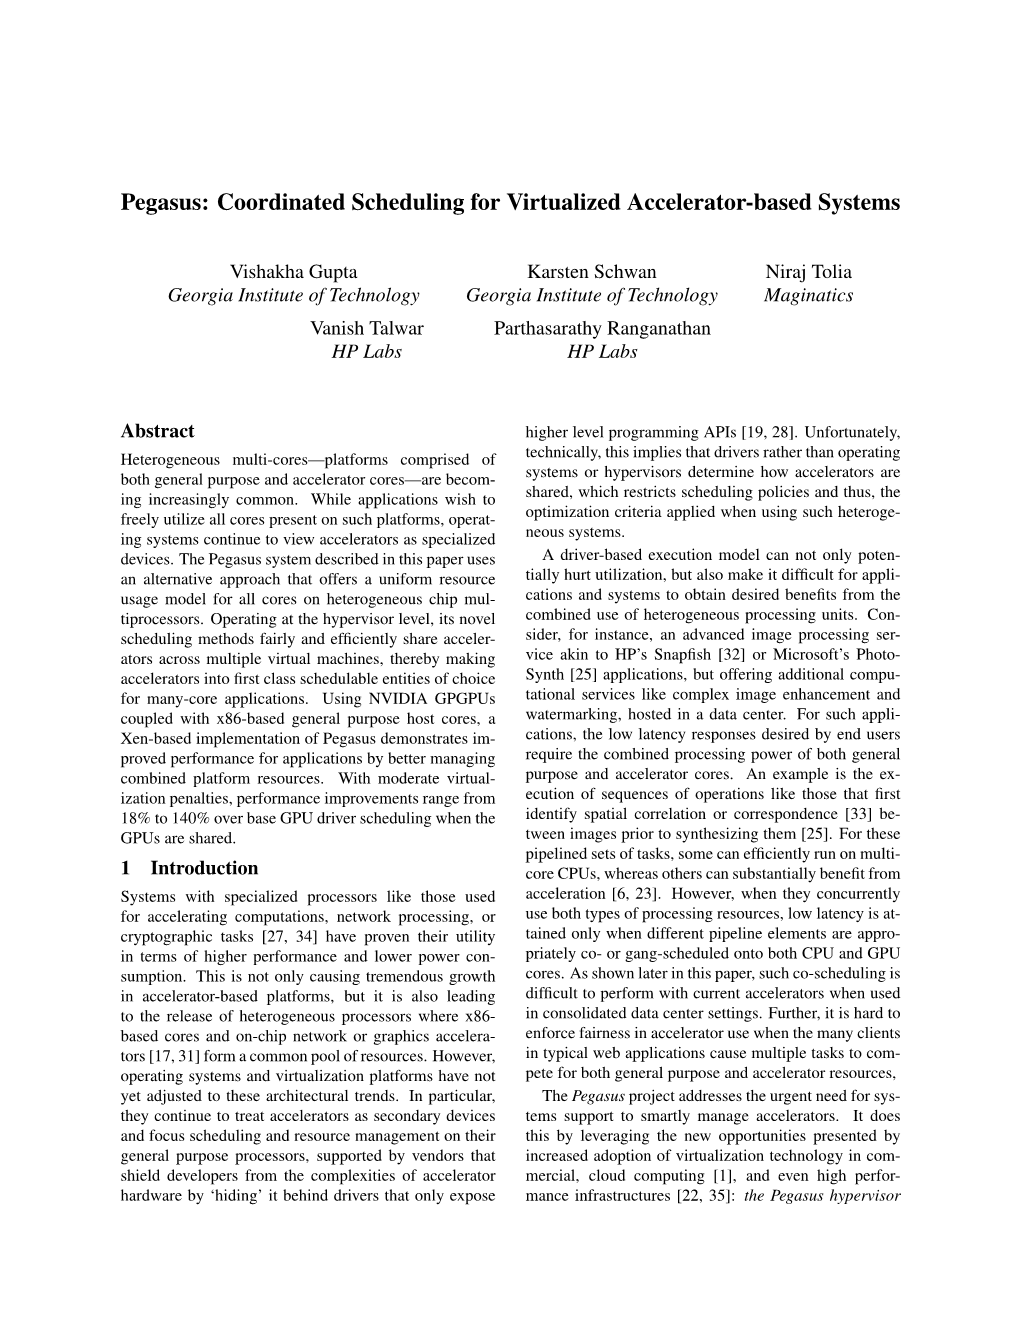 Pegasus: Coordinated Scheduling for Virtualized Accelerator-Based Systems